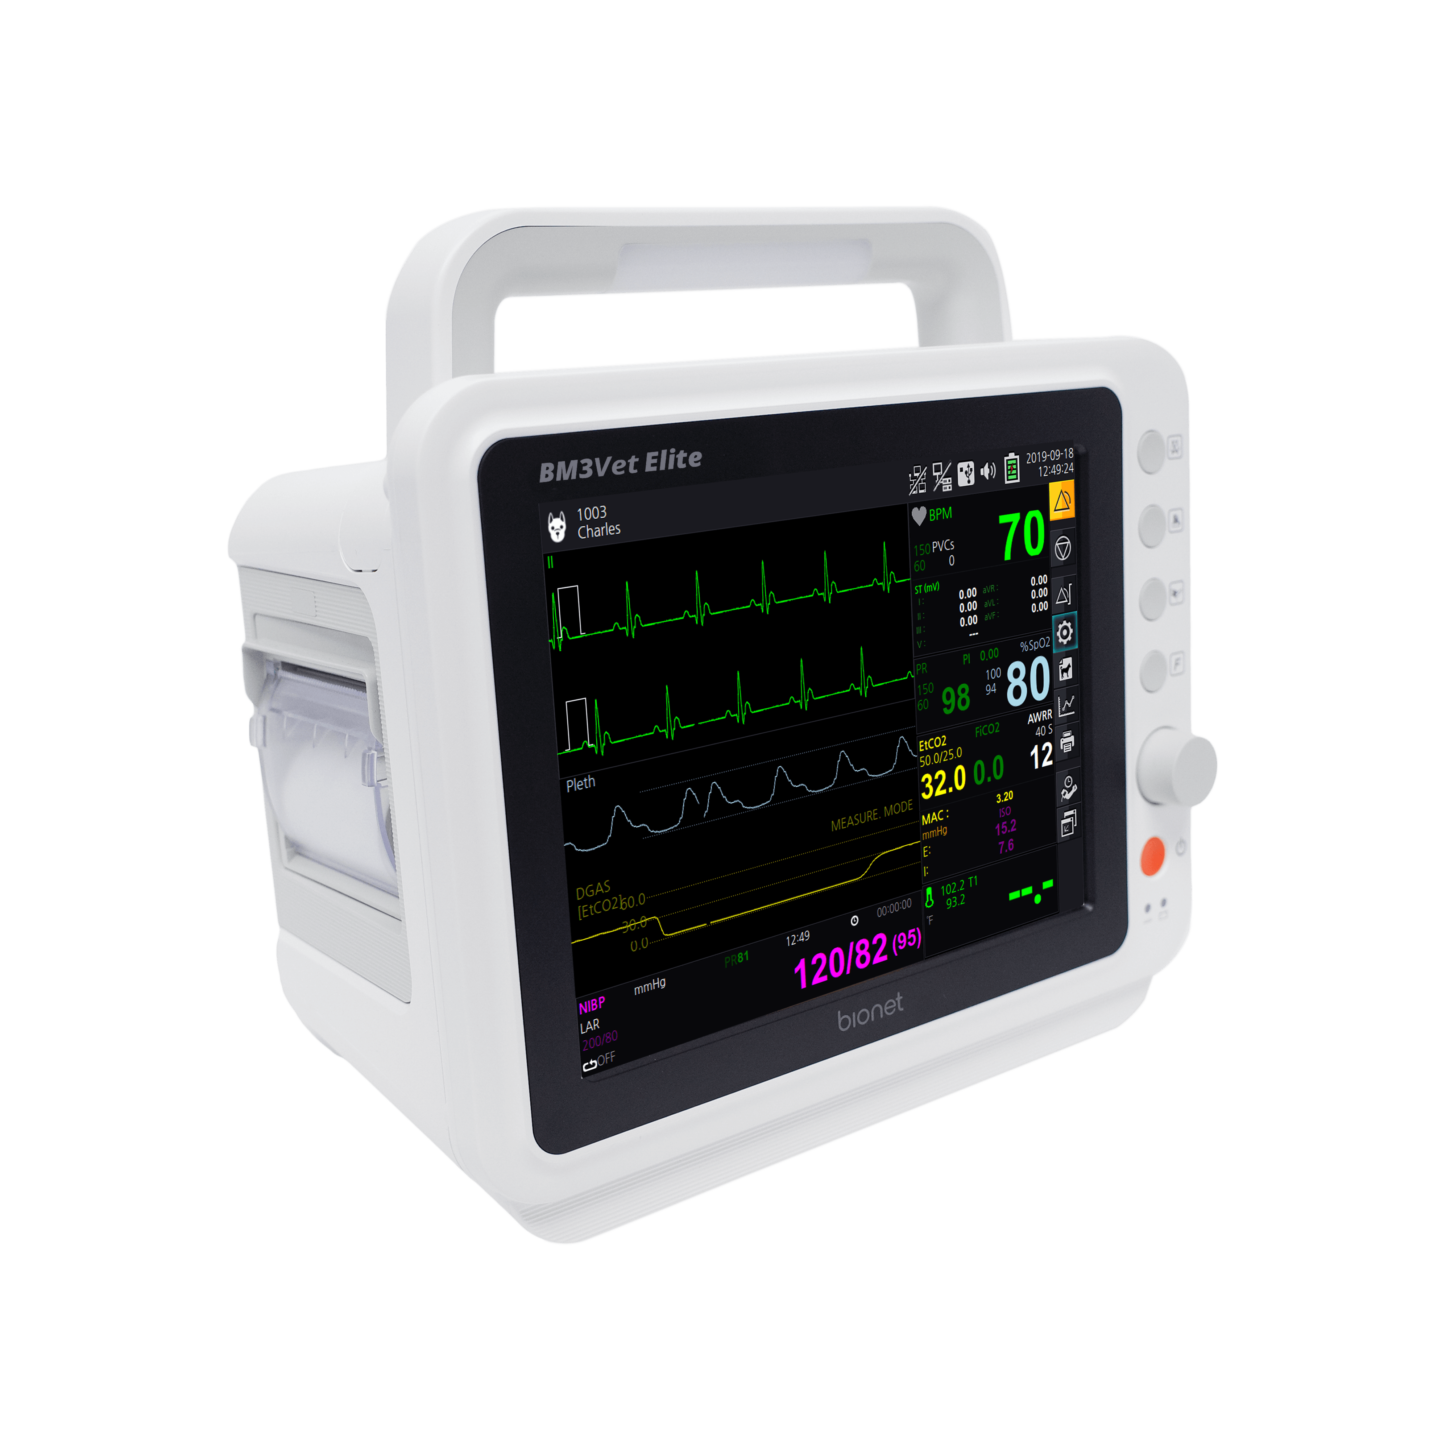 Mindray T1 Patient Monitor with Etco2